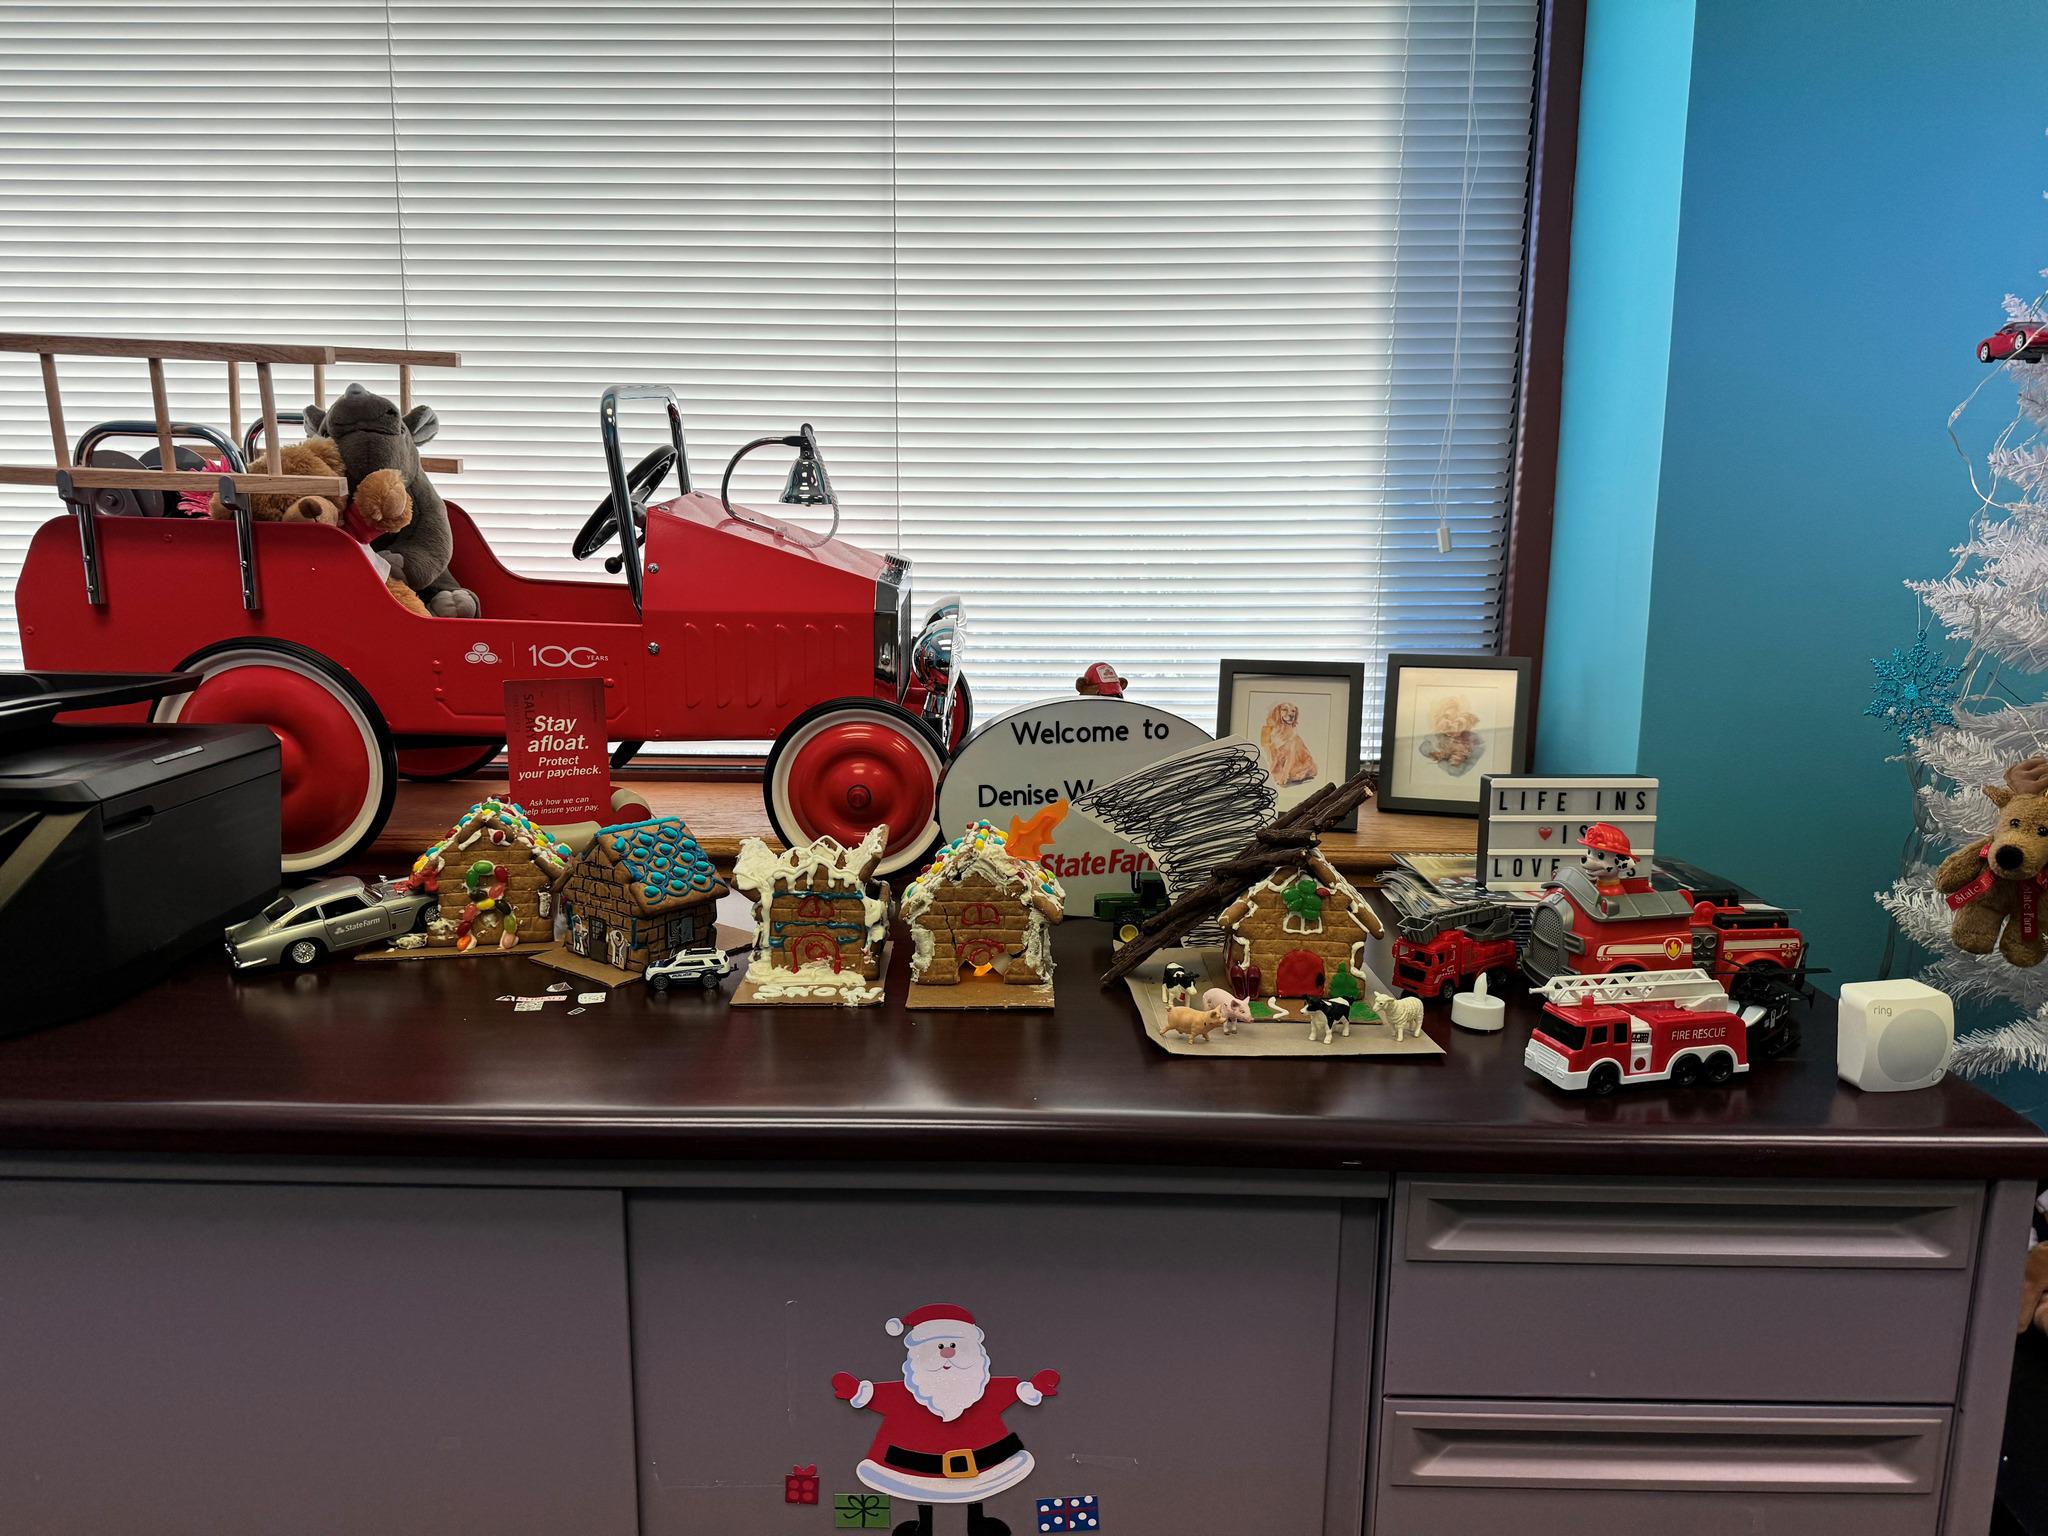 #nationalgingerbreadhouseday 
It's Christmas Season here at the office with our Disaster neighborhood! Watch for these perils, and make sure State Farm protects you and your family!
Please comment below which house is your favorite so we can reward our winning team member! 🎄🎅